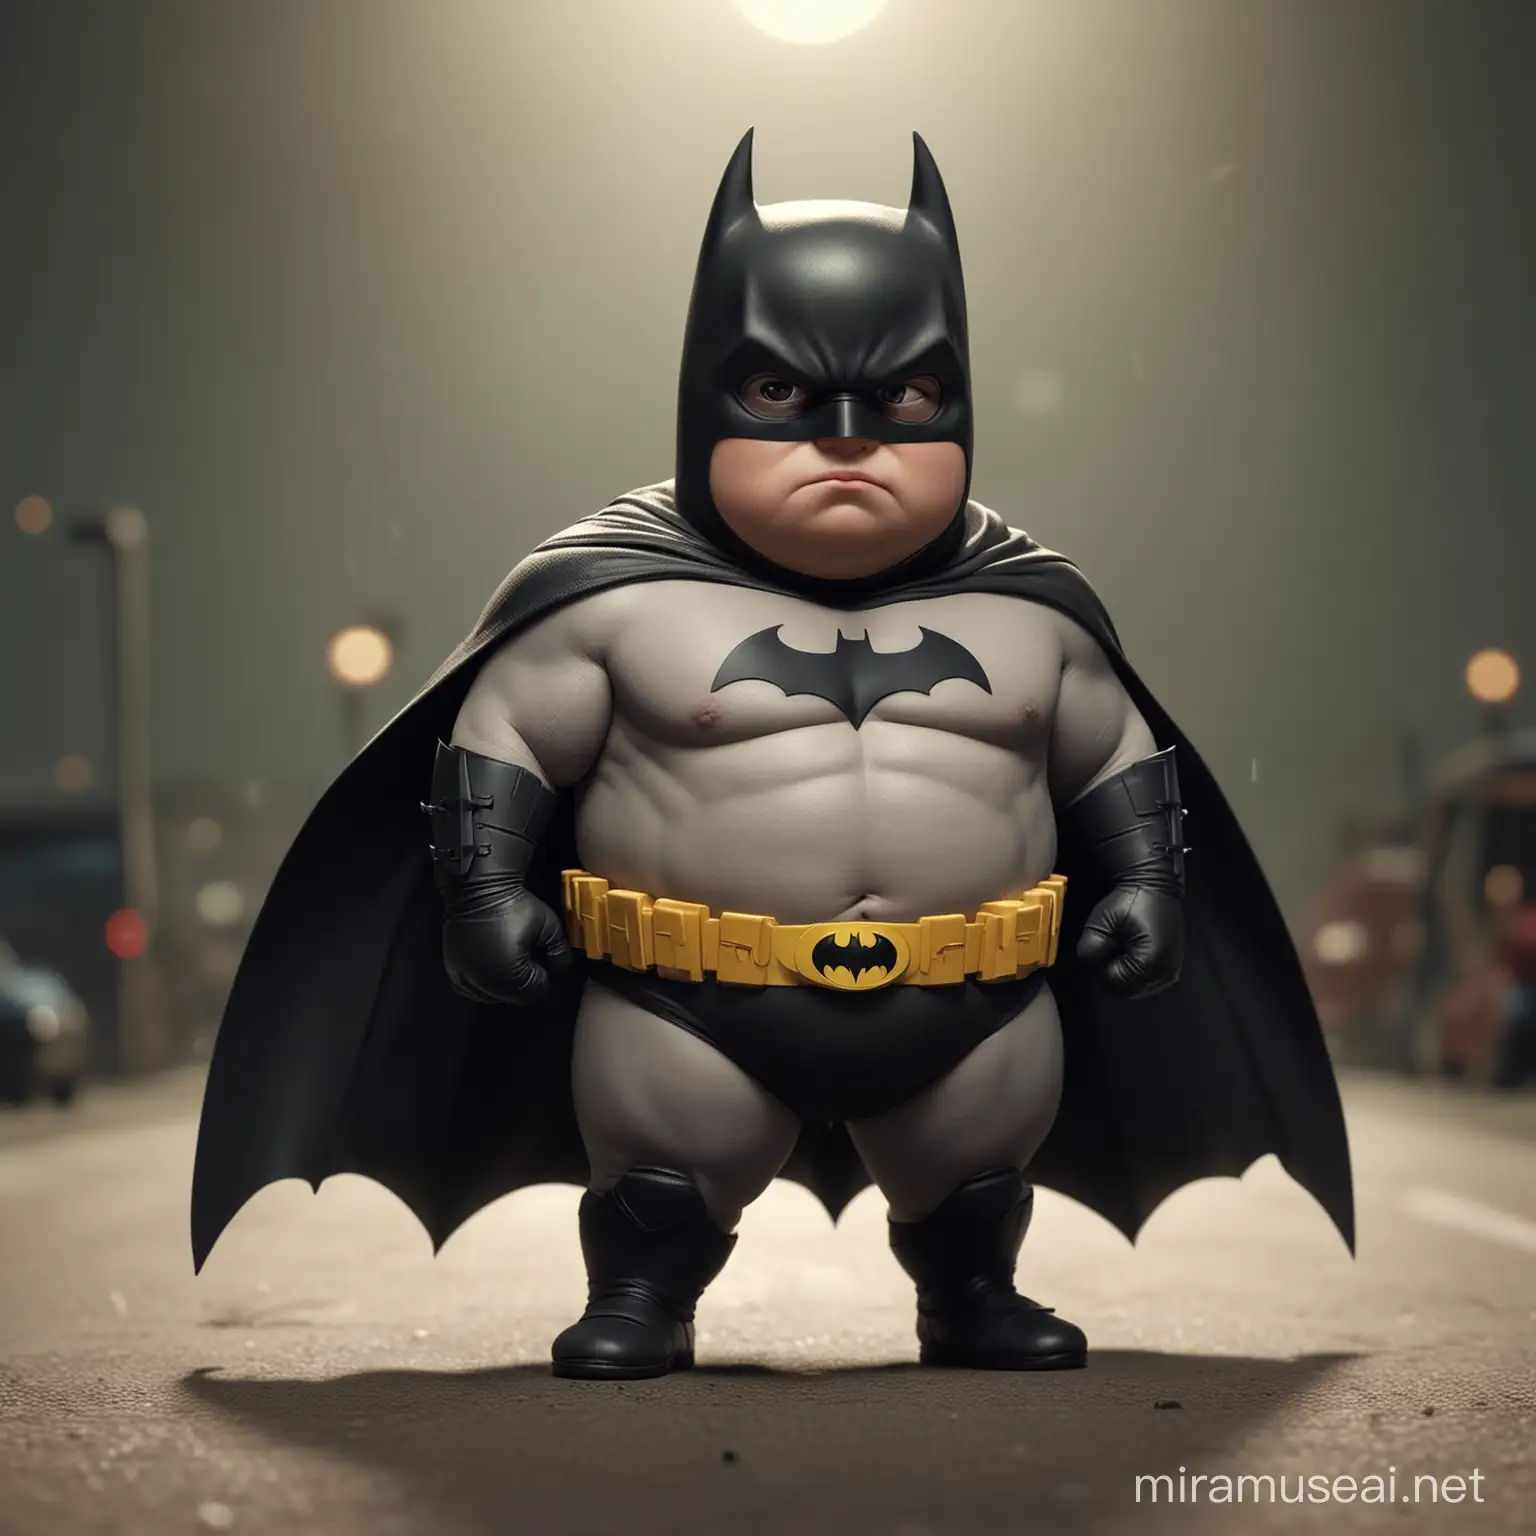 Adorable Little Batman with Chubby Cheeks and Cute Costume